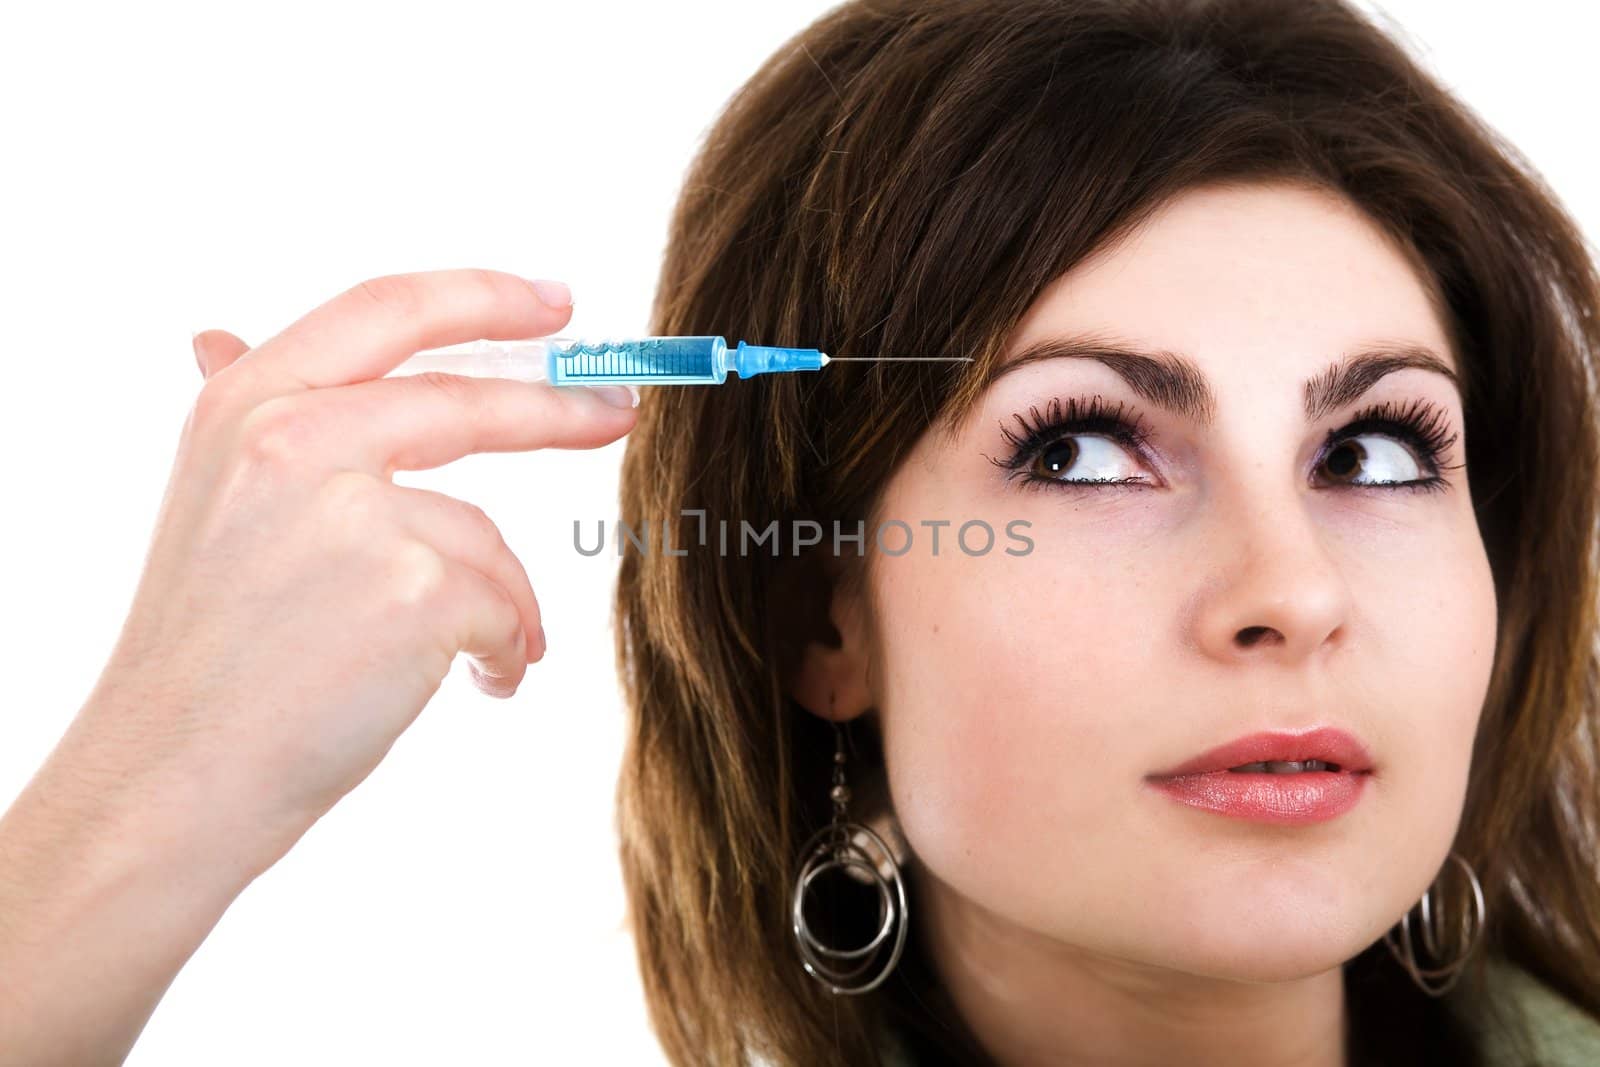 An image of a girl with an injection